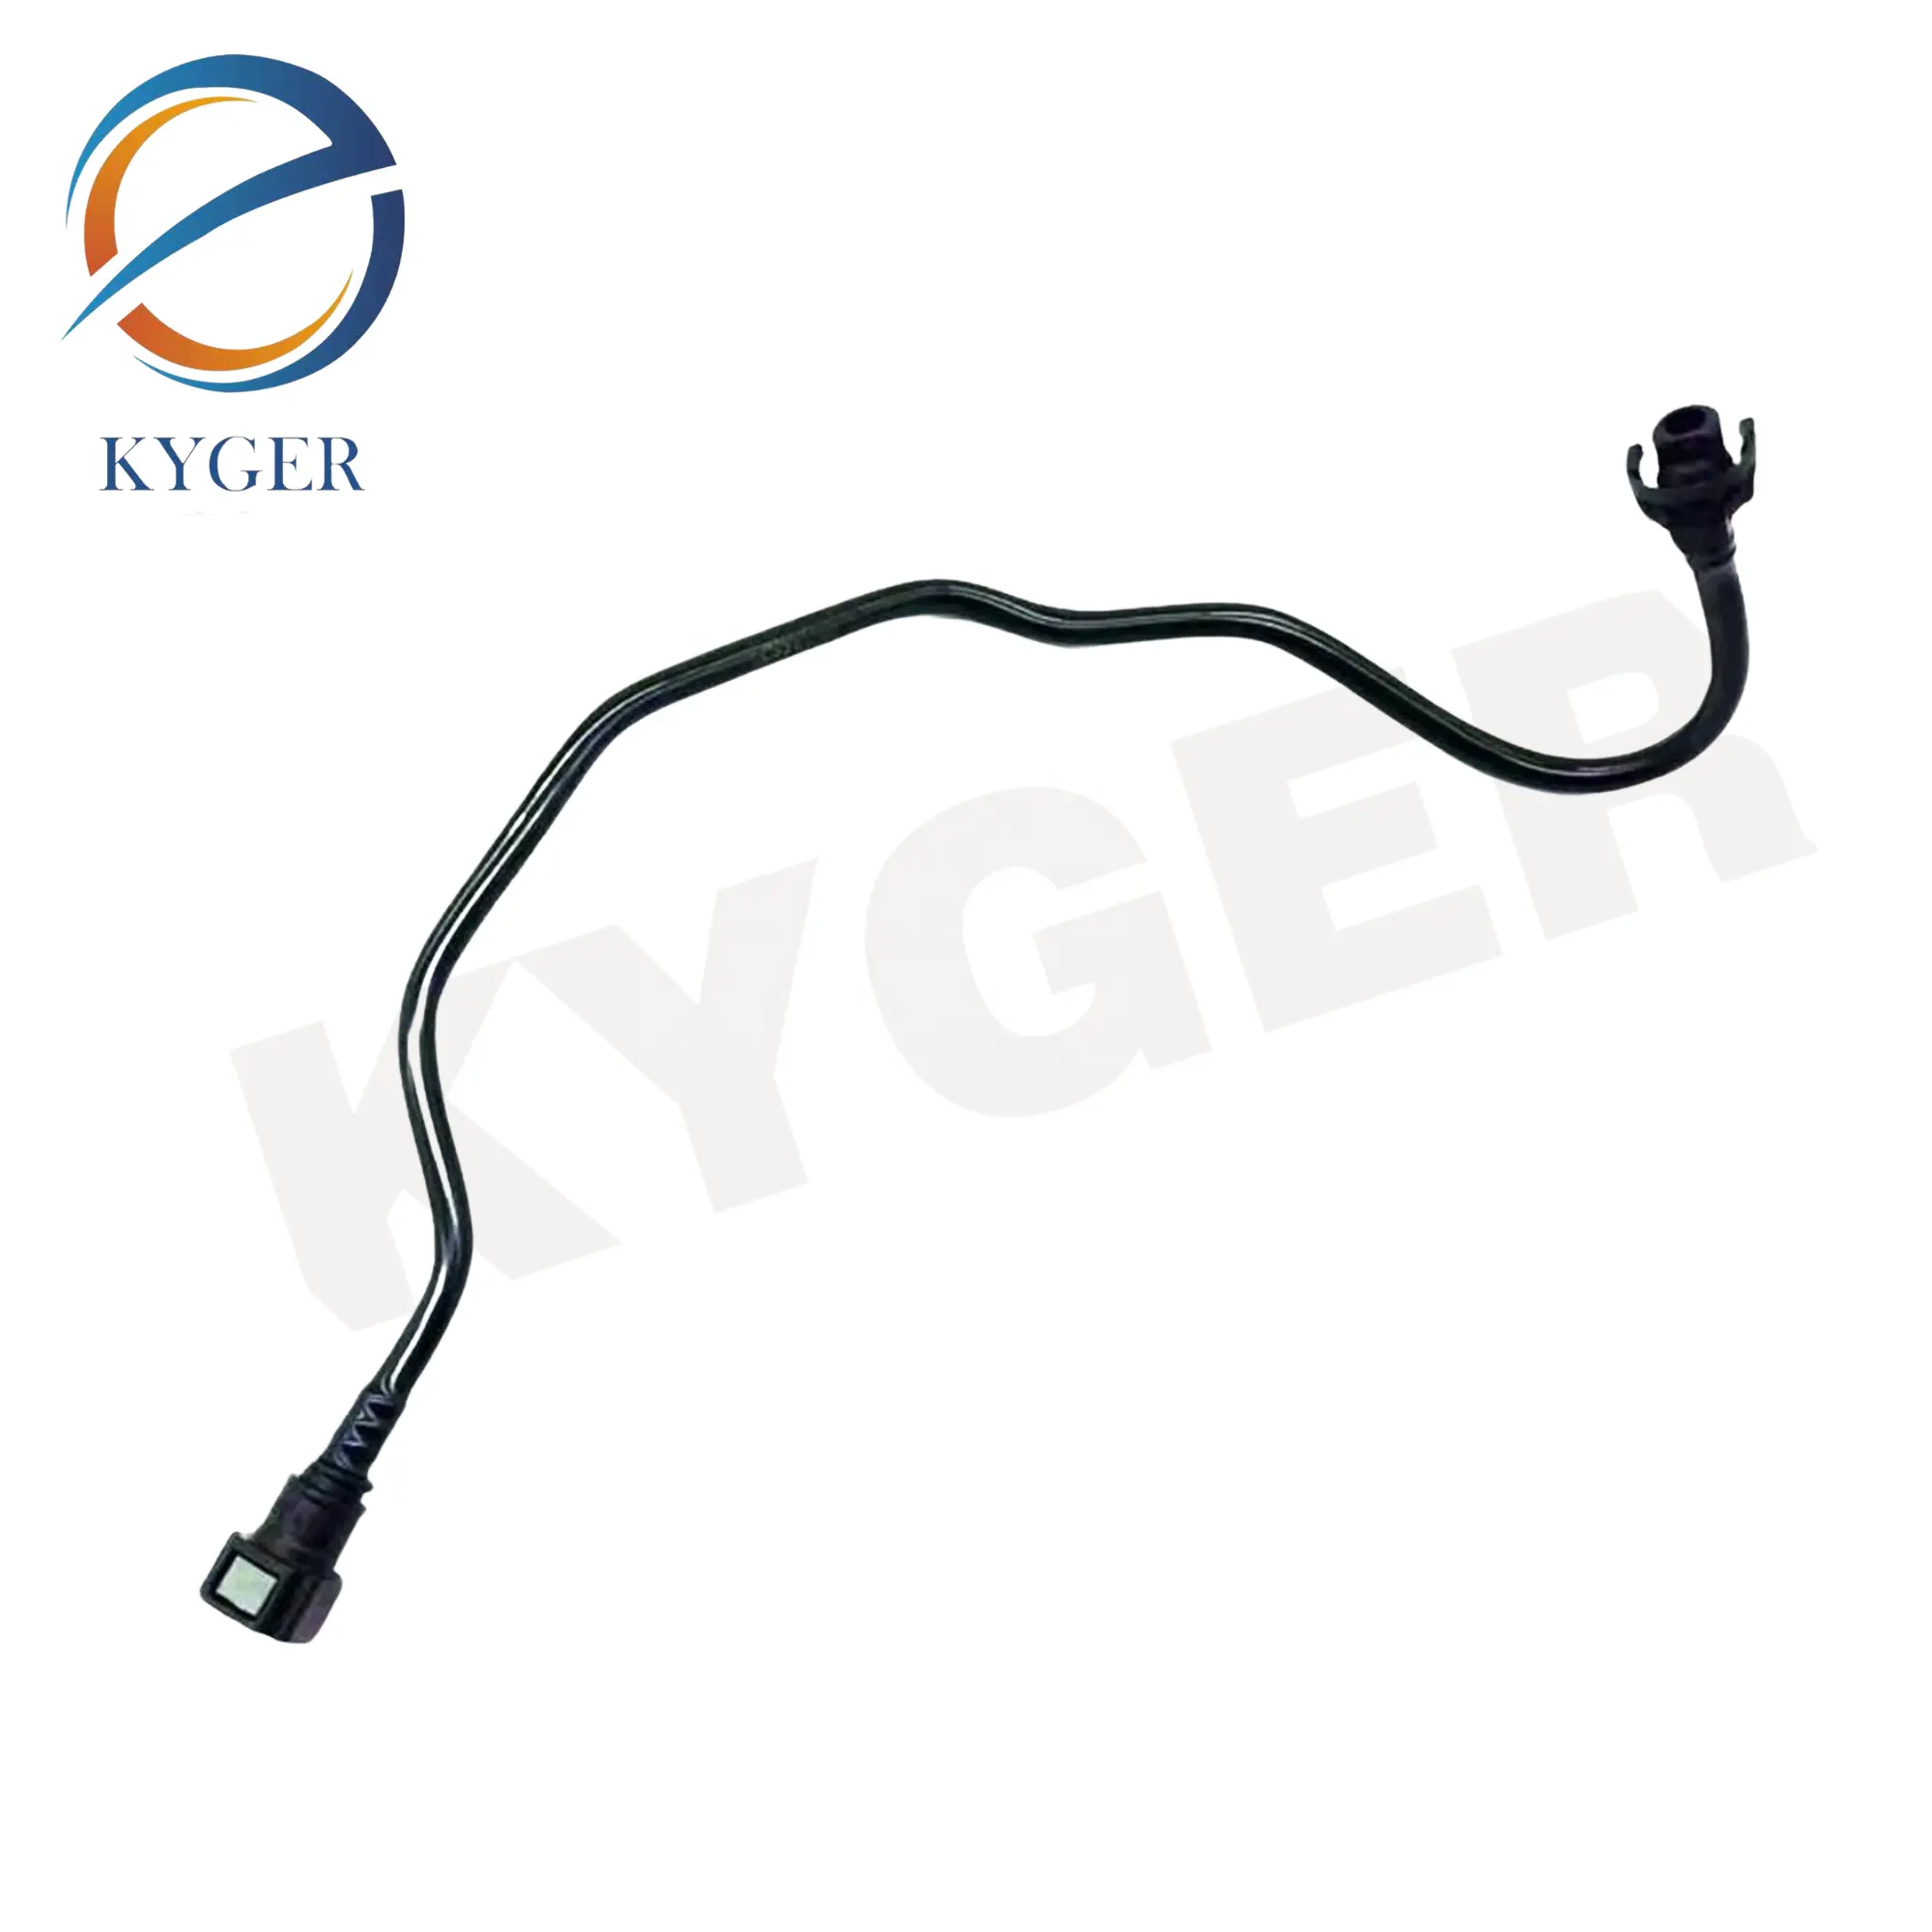 LR035629 Car Expansion L8B28464AB Tank Hose Water Pipe With Professional Cooling System Auto Parts Manufacturer For Range Rover